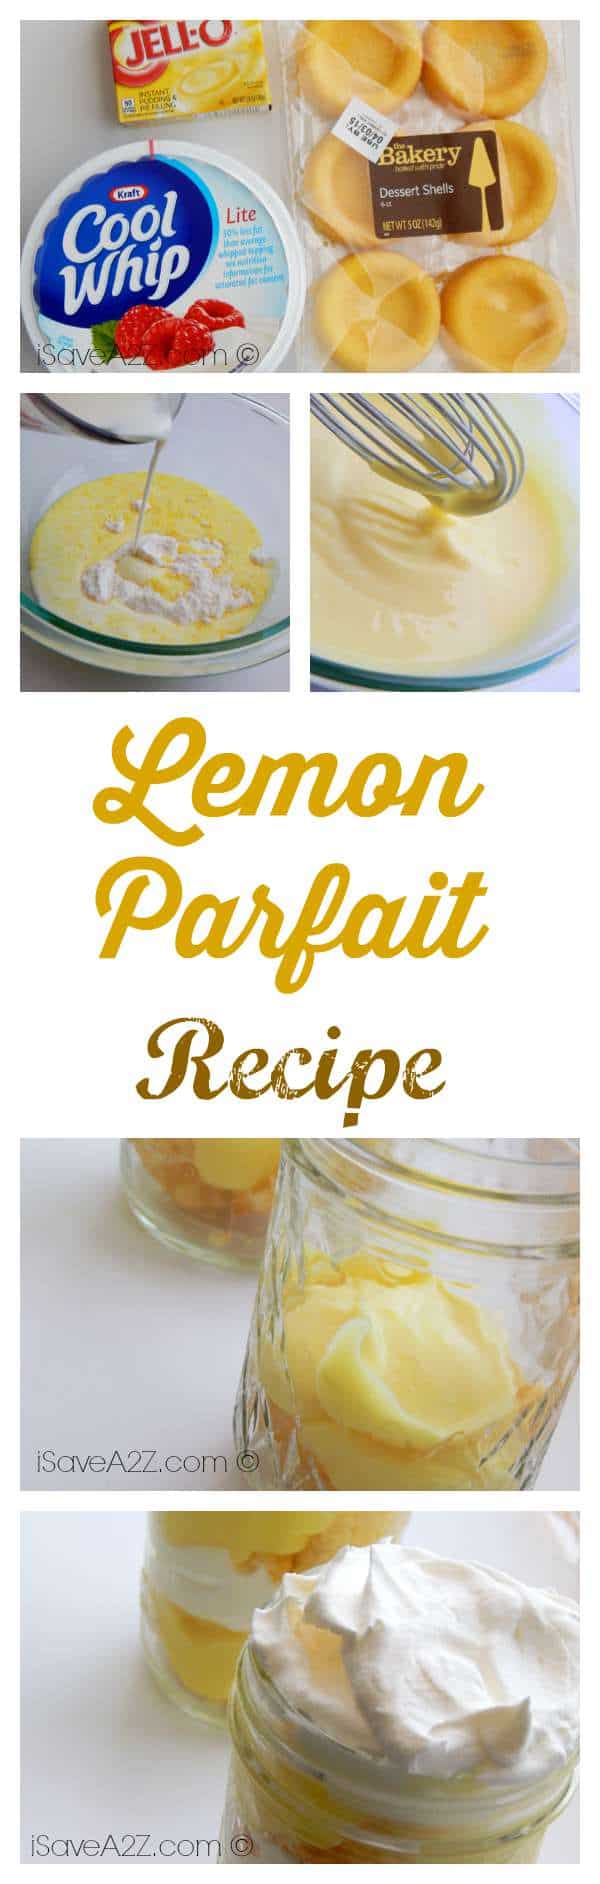 You are going to love this lemon parfait recipe! It's so delicious and easy to make that everyone will want to get their hands on the recipe.